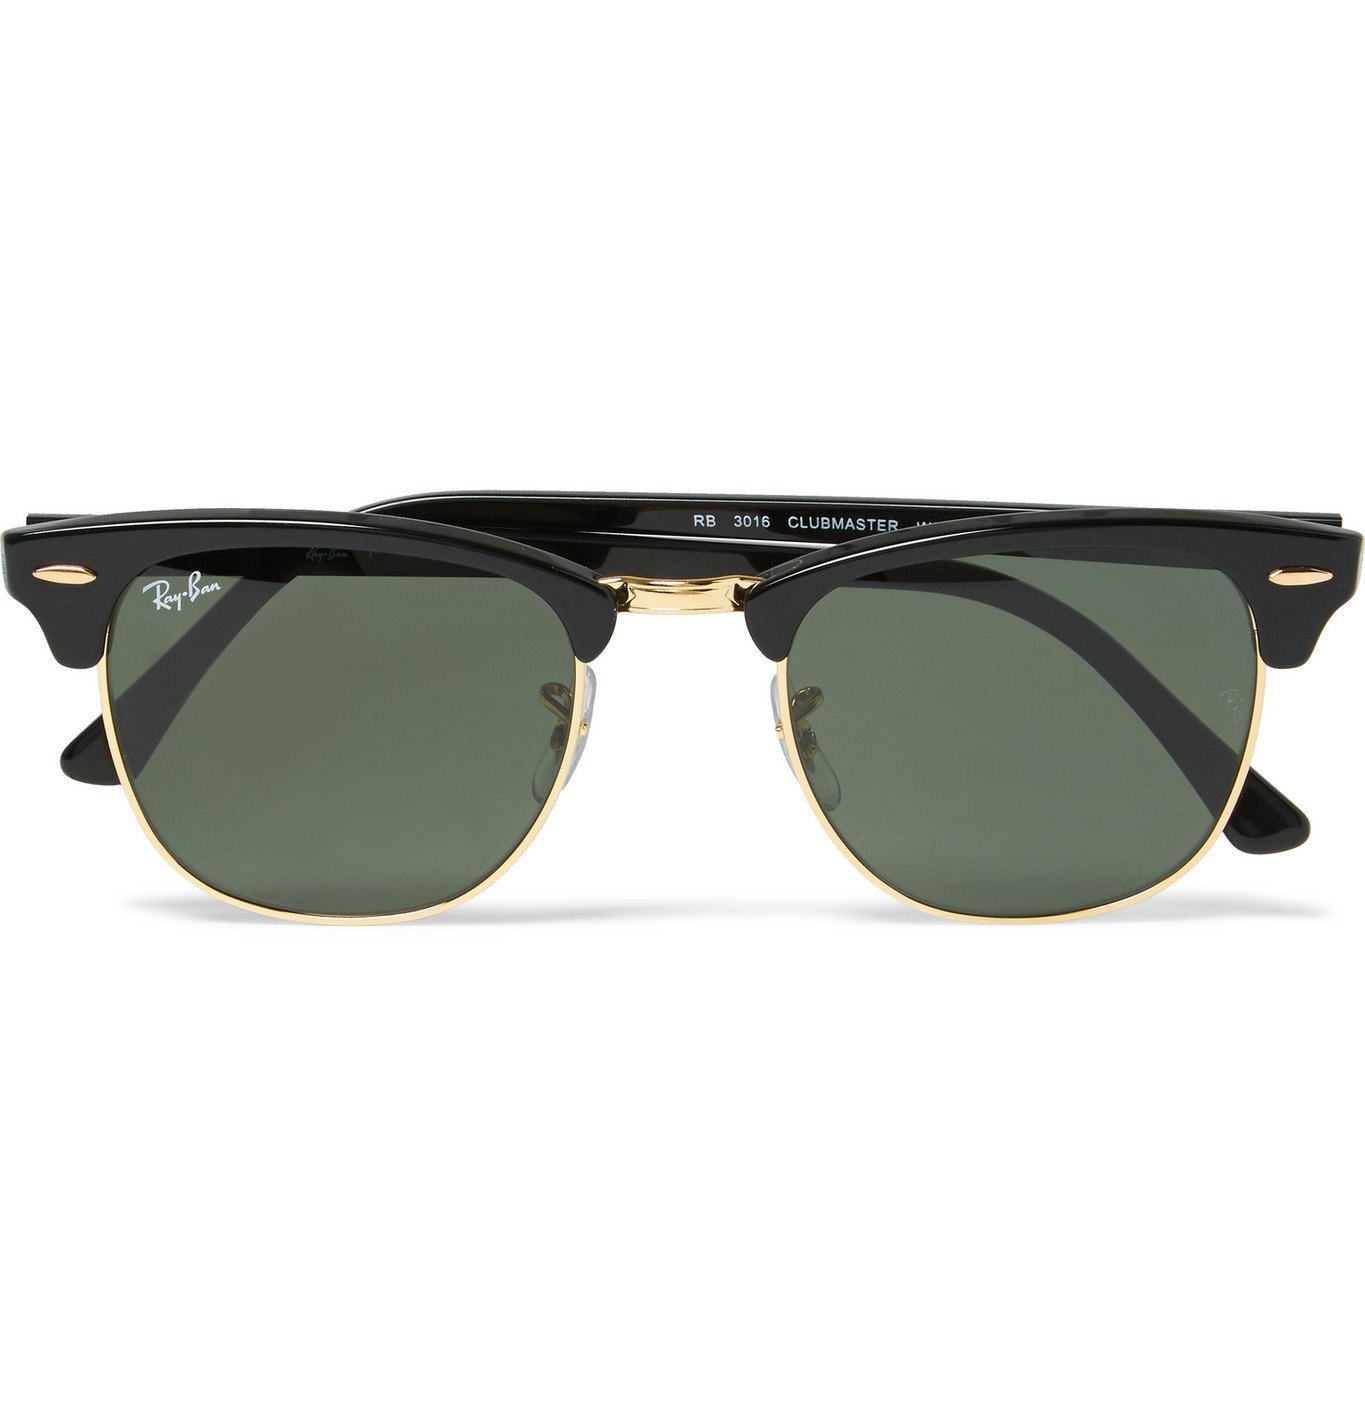 clubmaster sunglasses black and gold